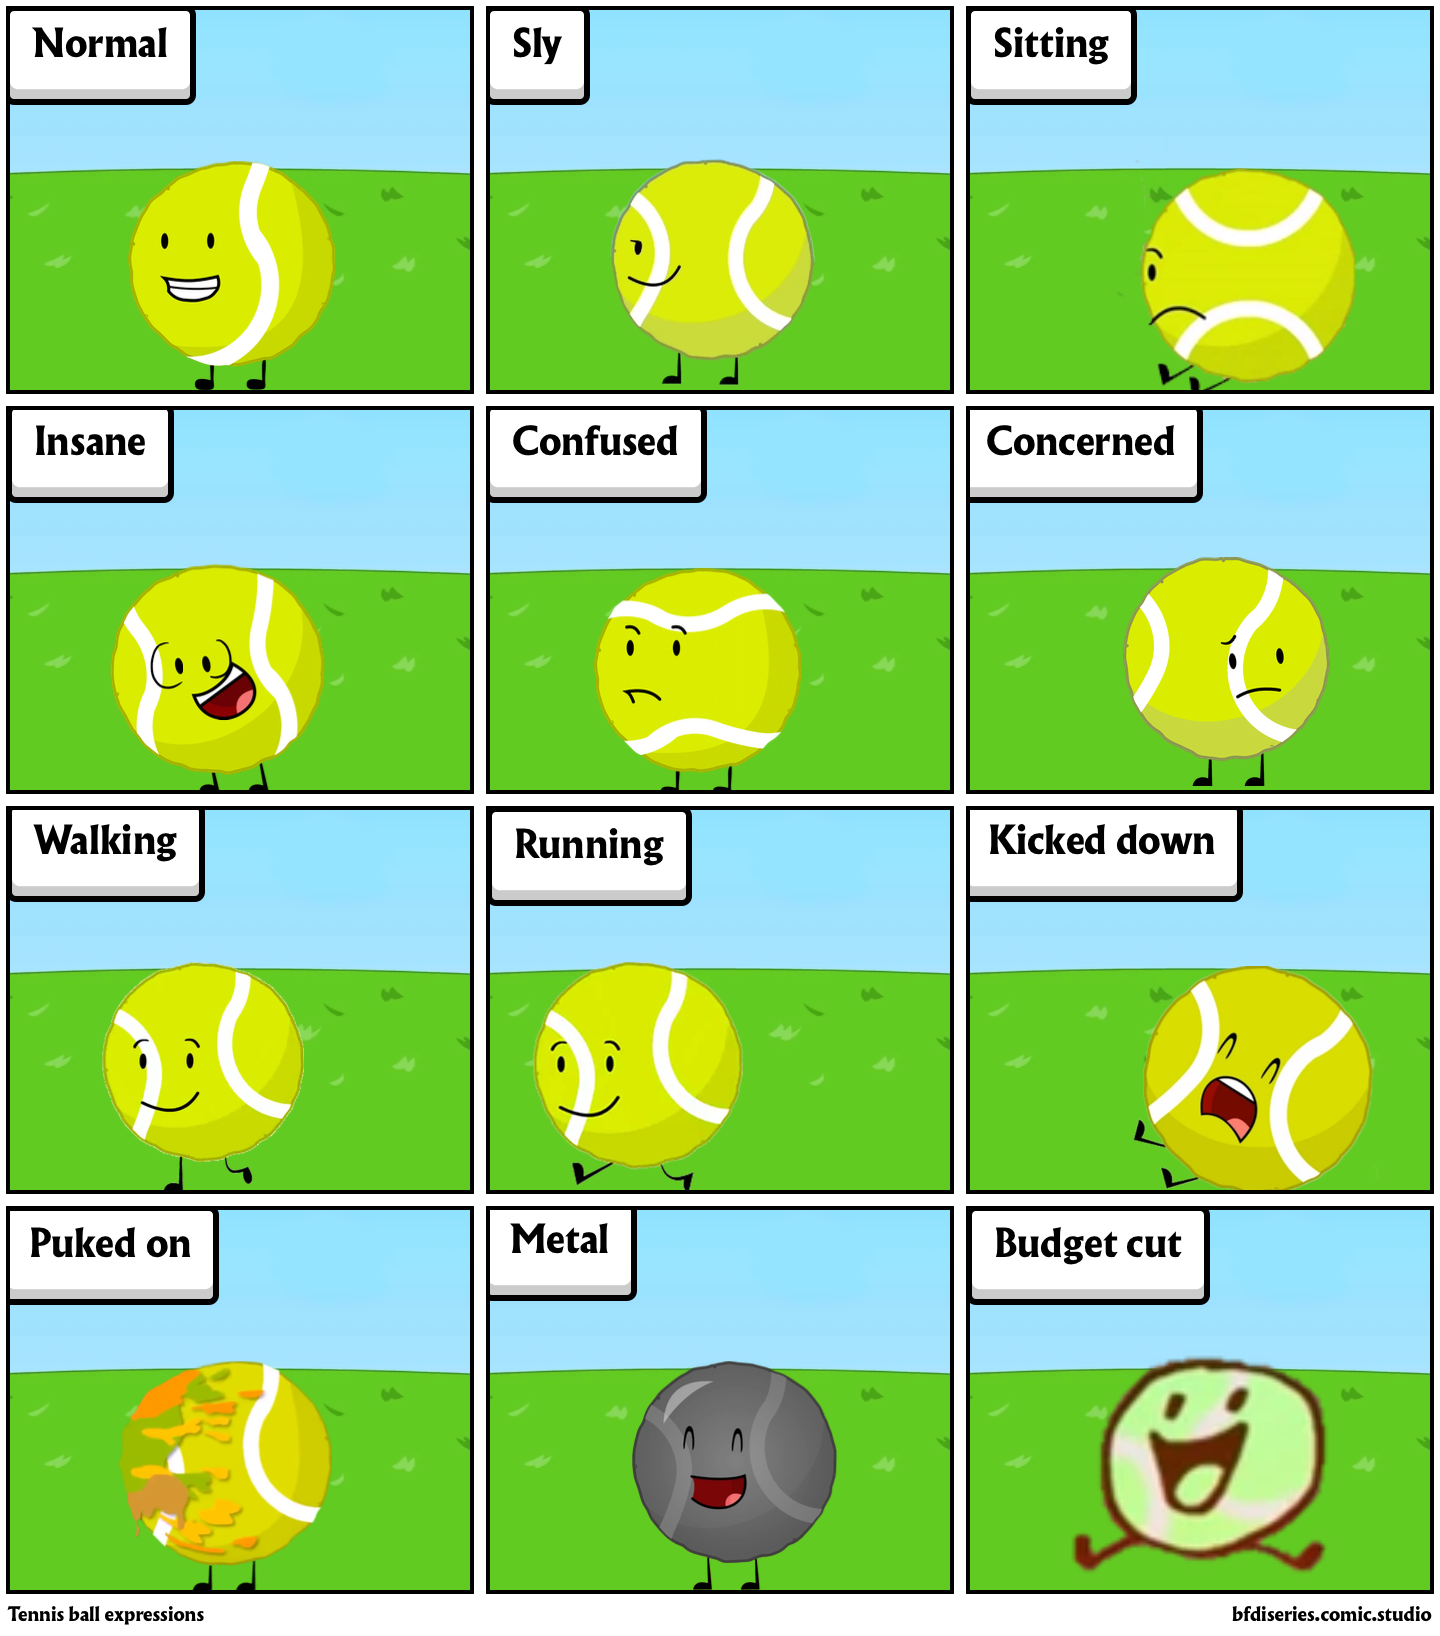 Tennis ball expressions